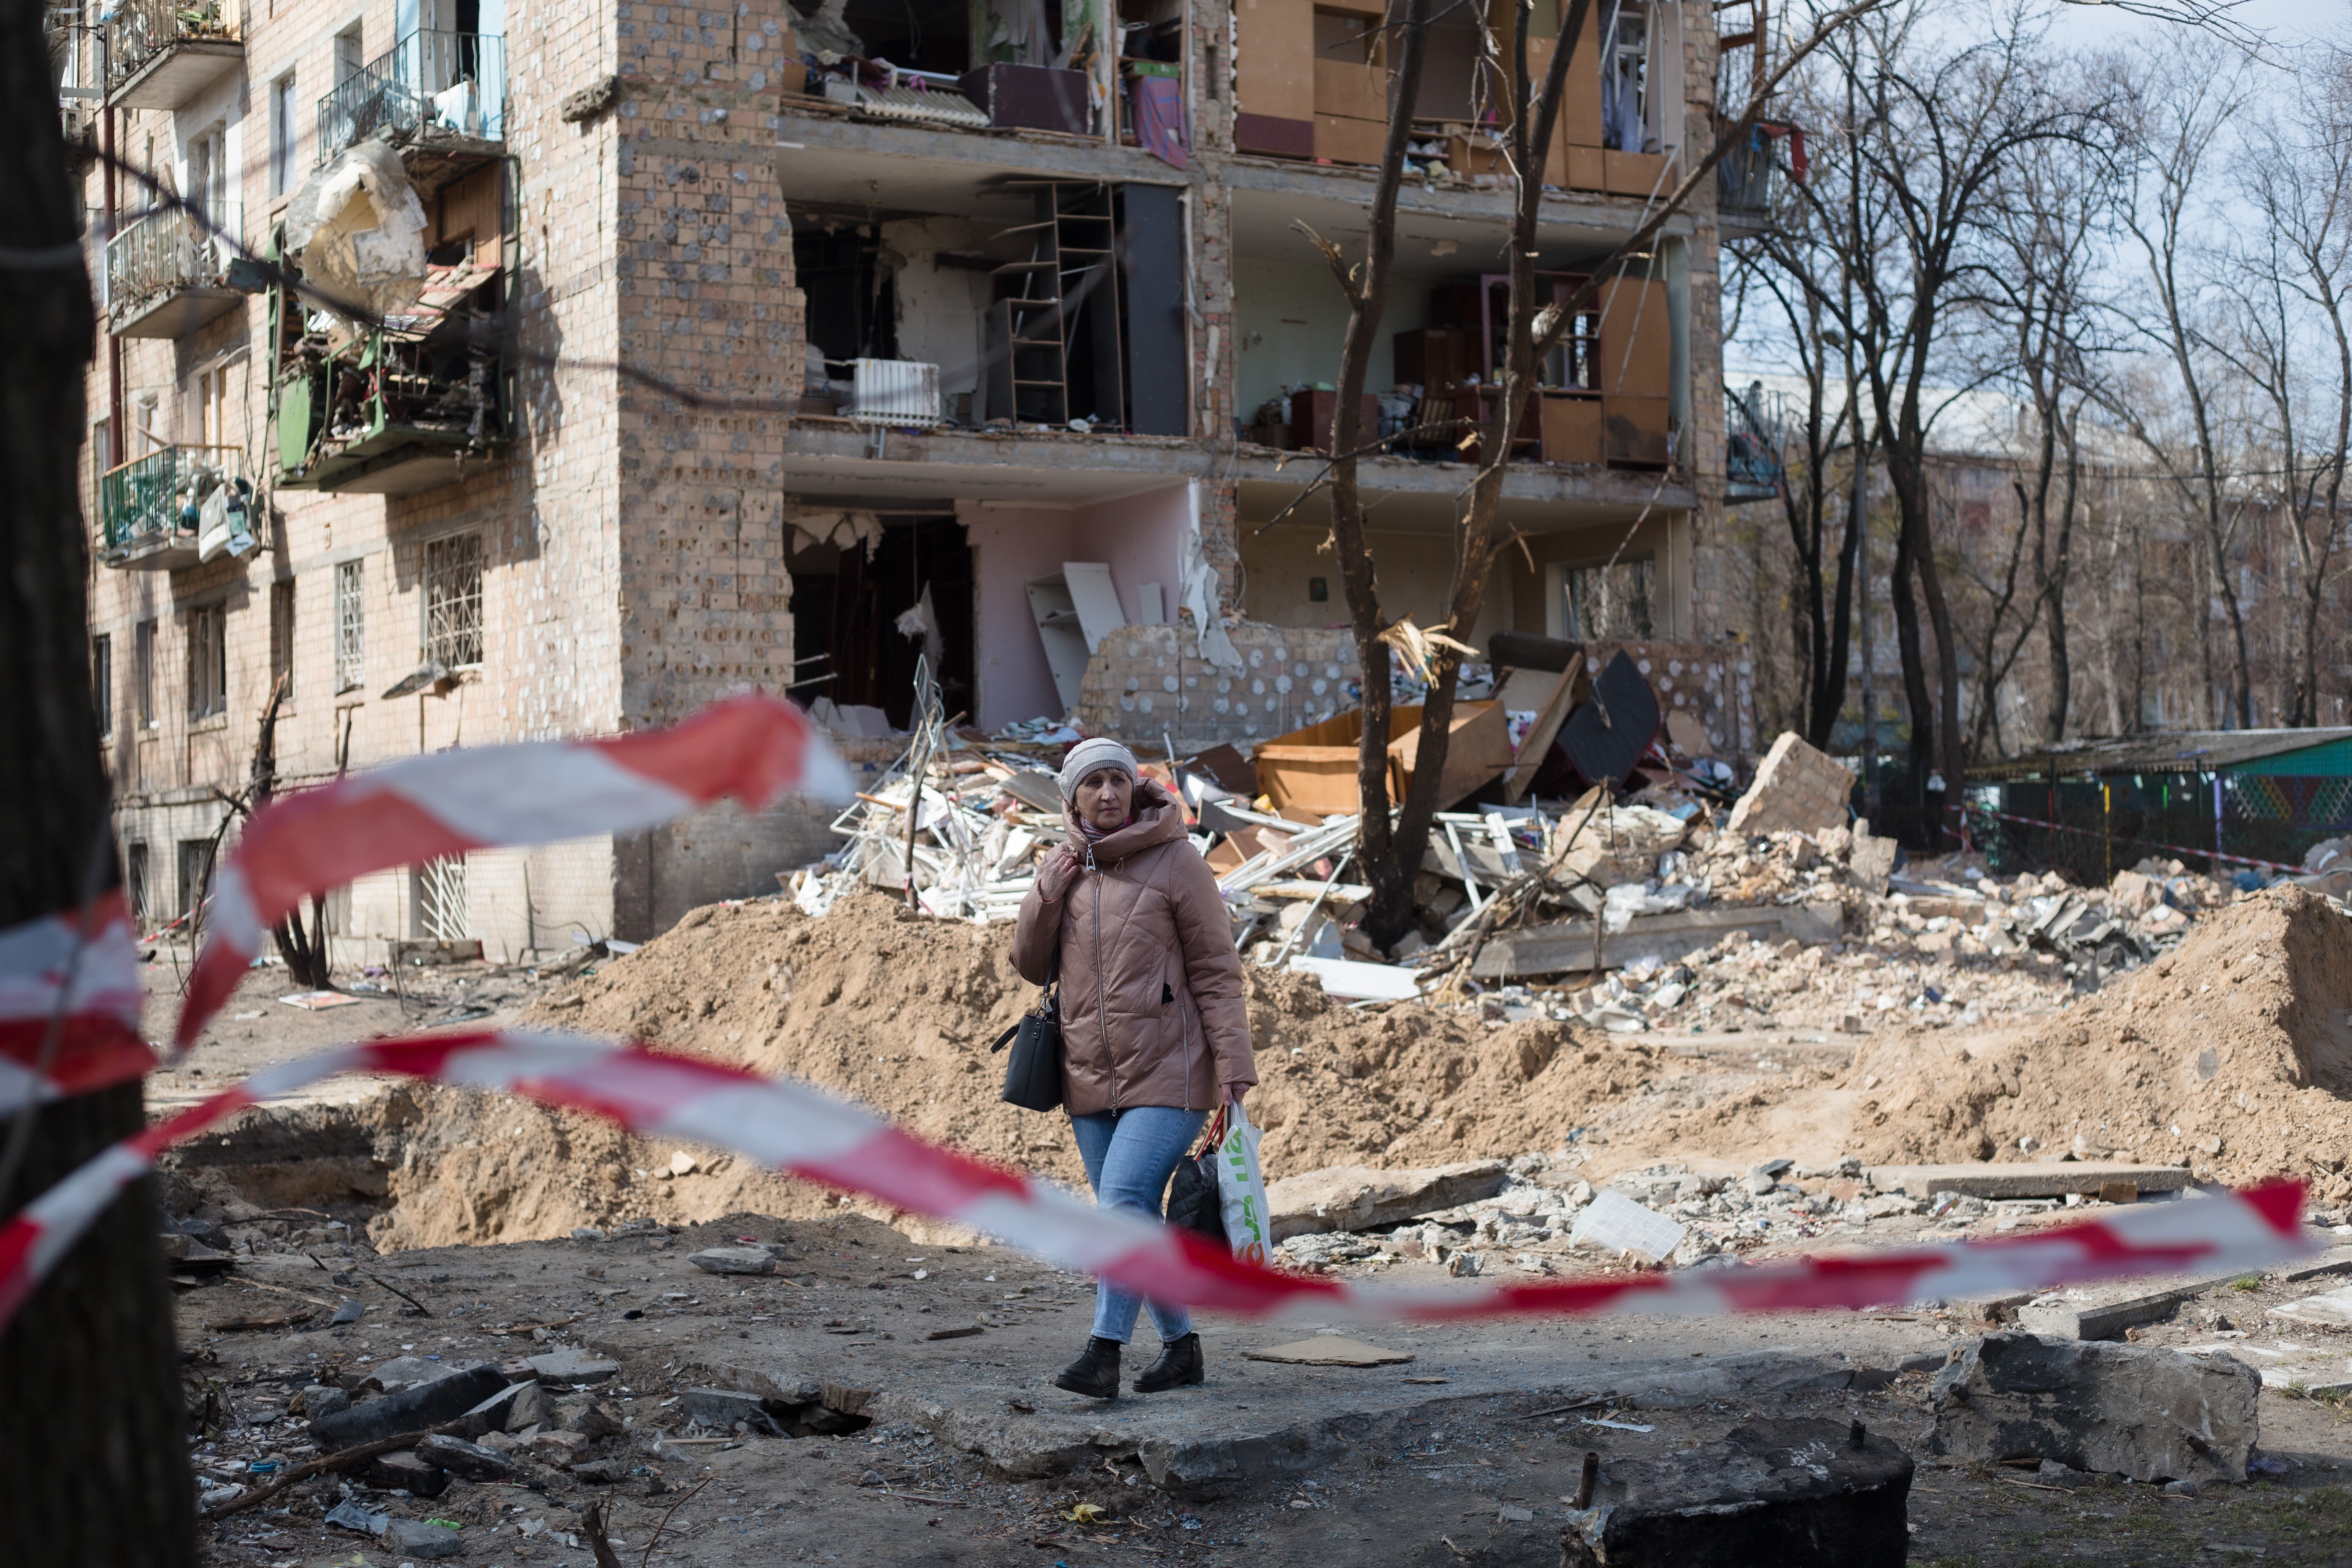 A woman walks past a residential area that was destroyed as a result of a rocket strike two weeks ago on 28 March in Kyiv